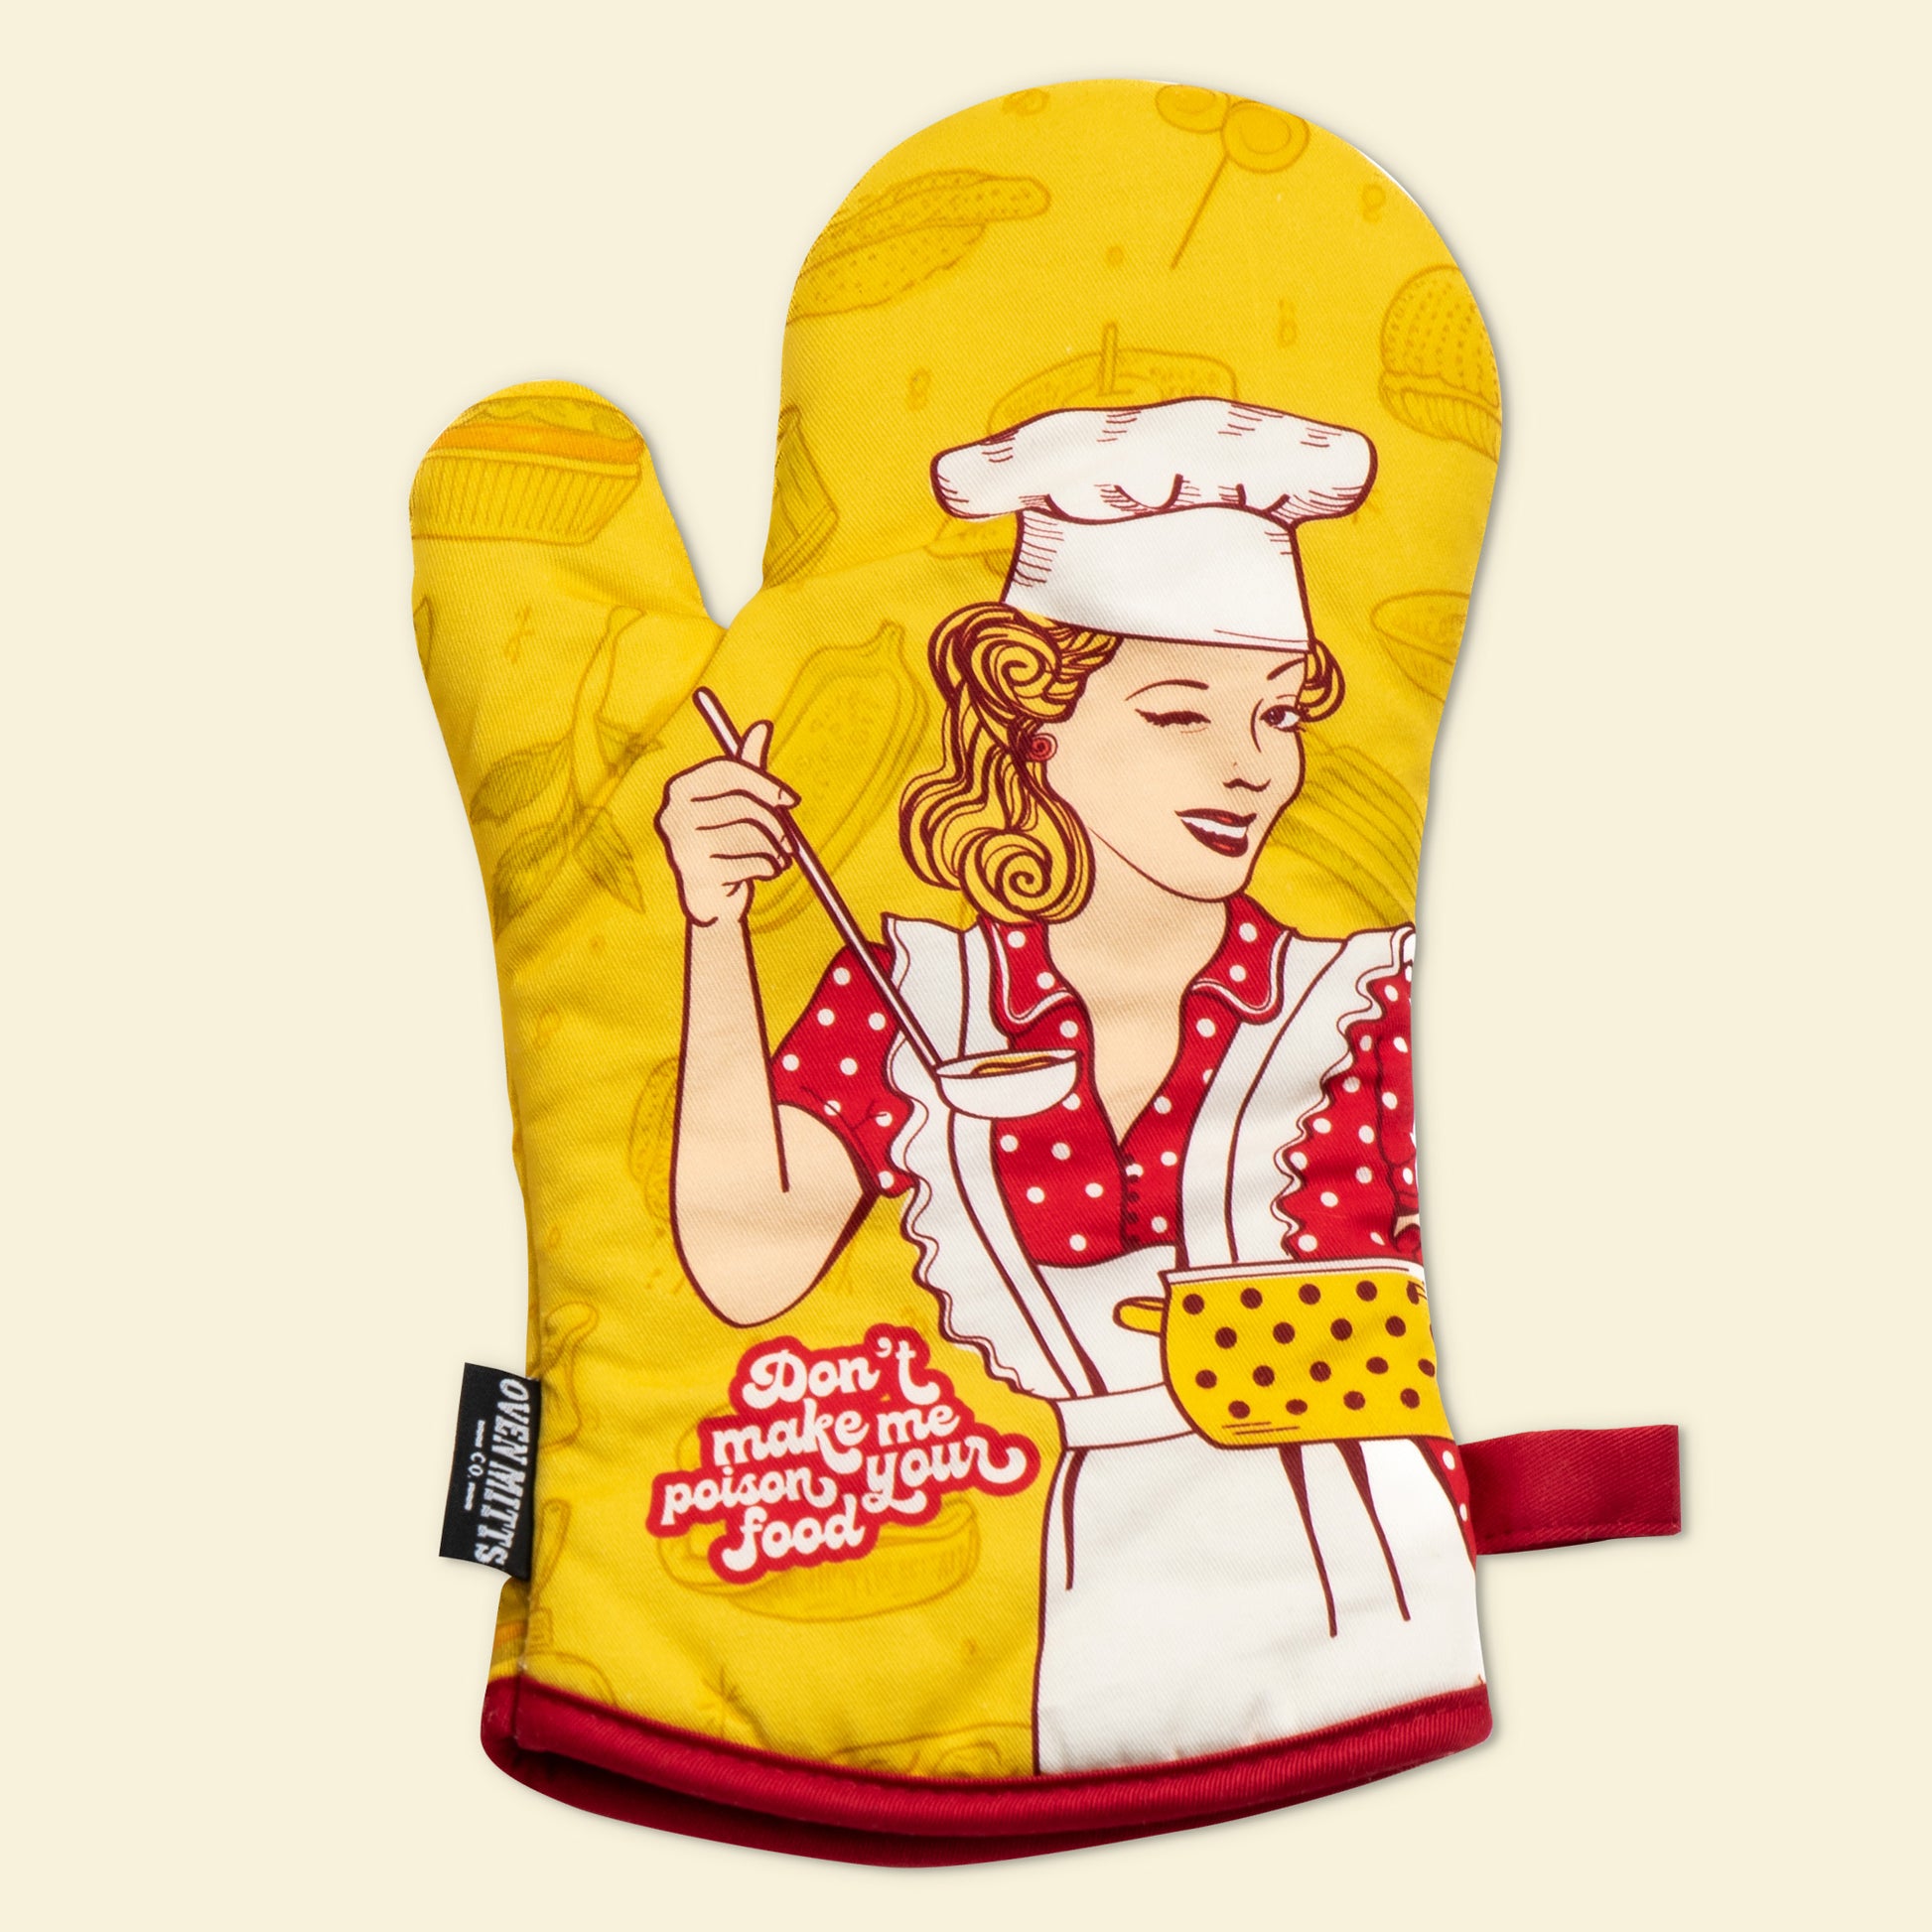 Don't Make Me Poison Your Food Oven Mitts right glove premium